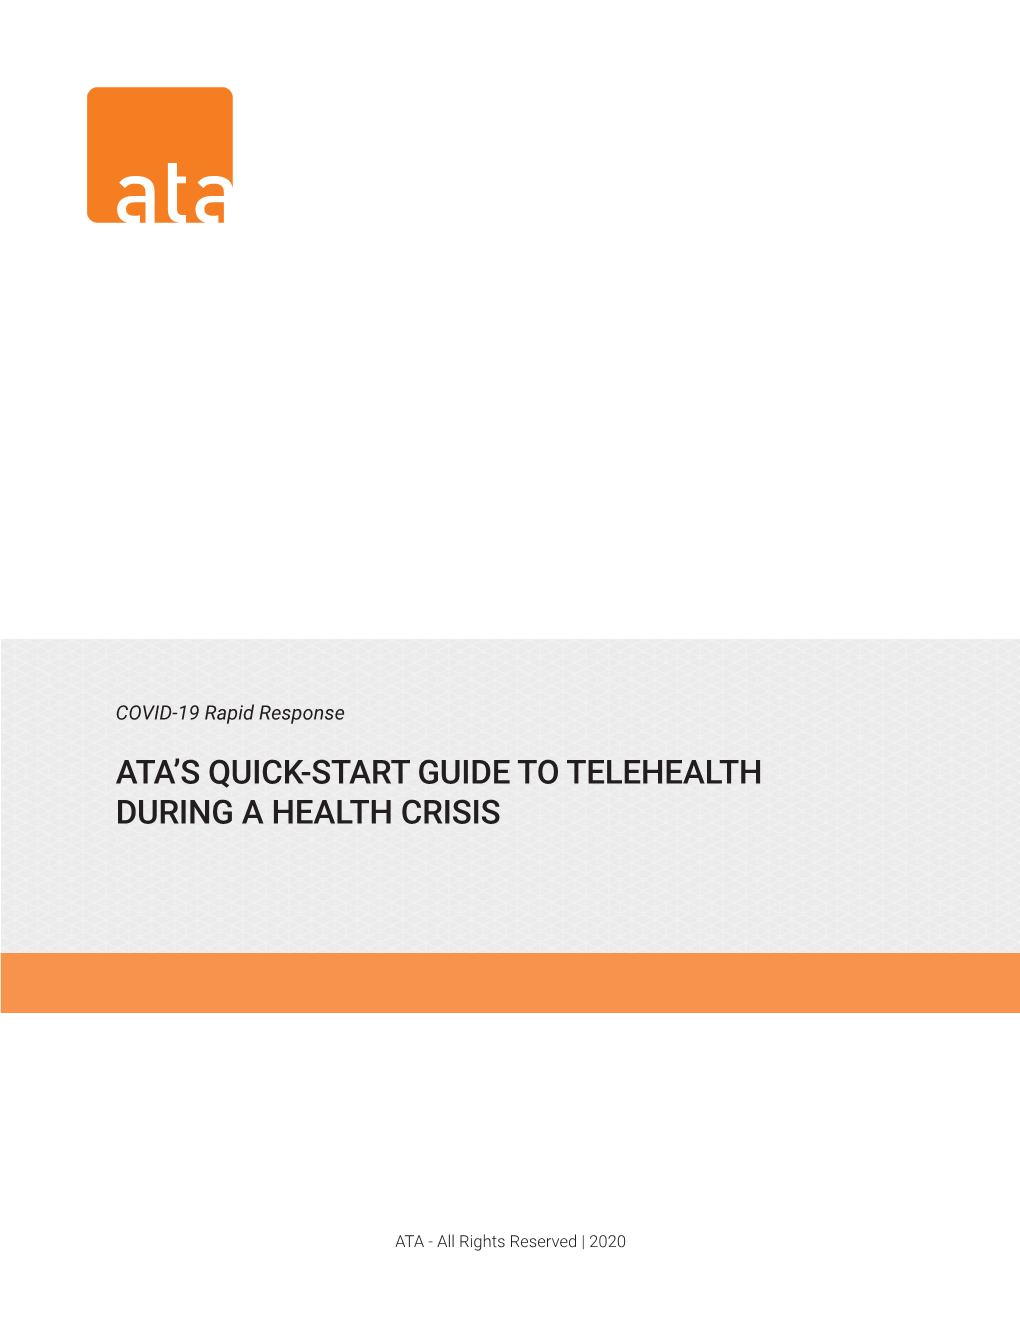 Ata's Quick-Start Guide to Telehealth During a Health